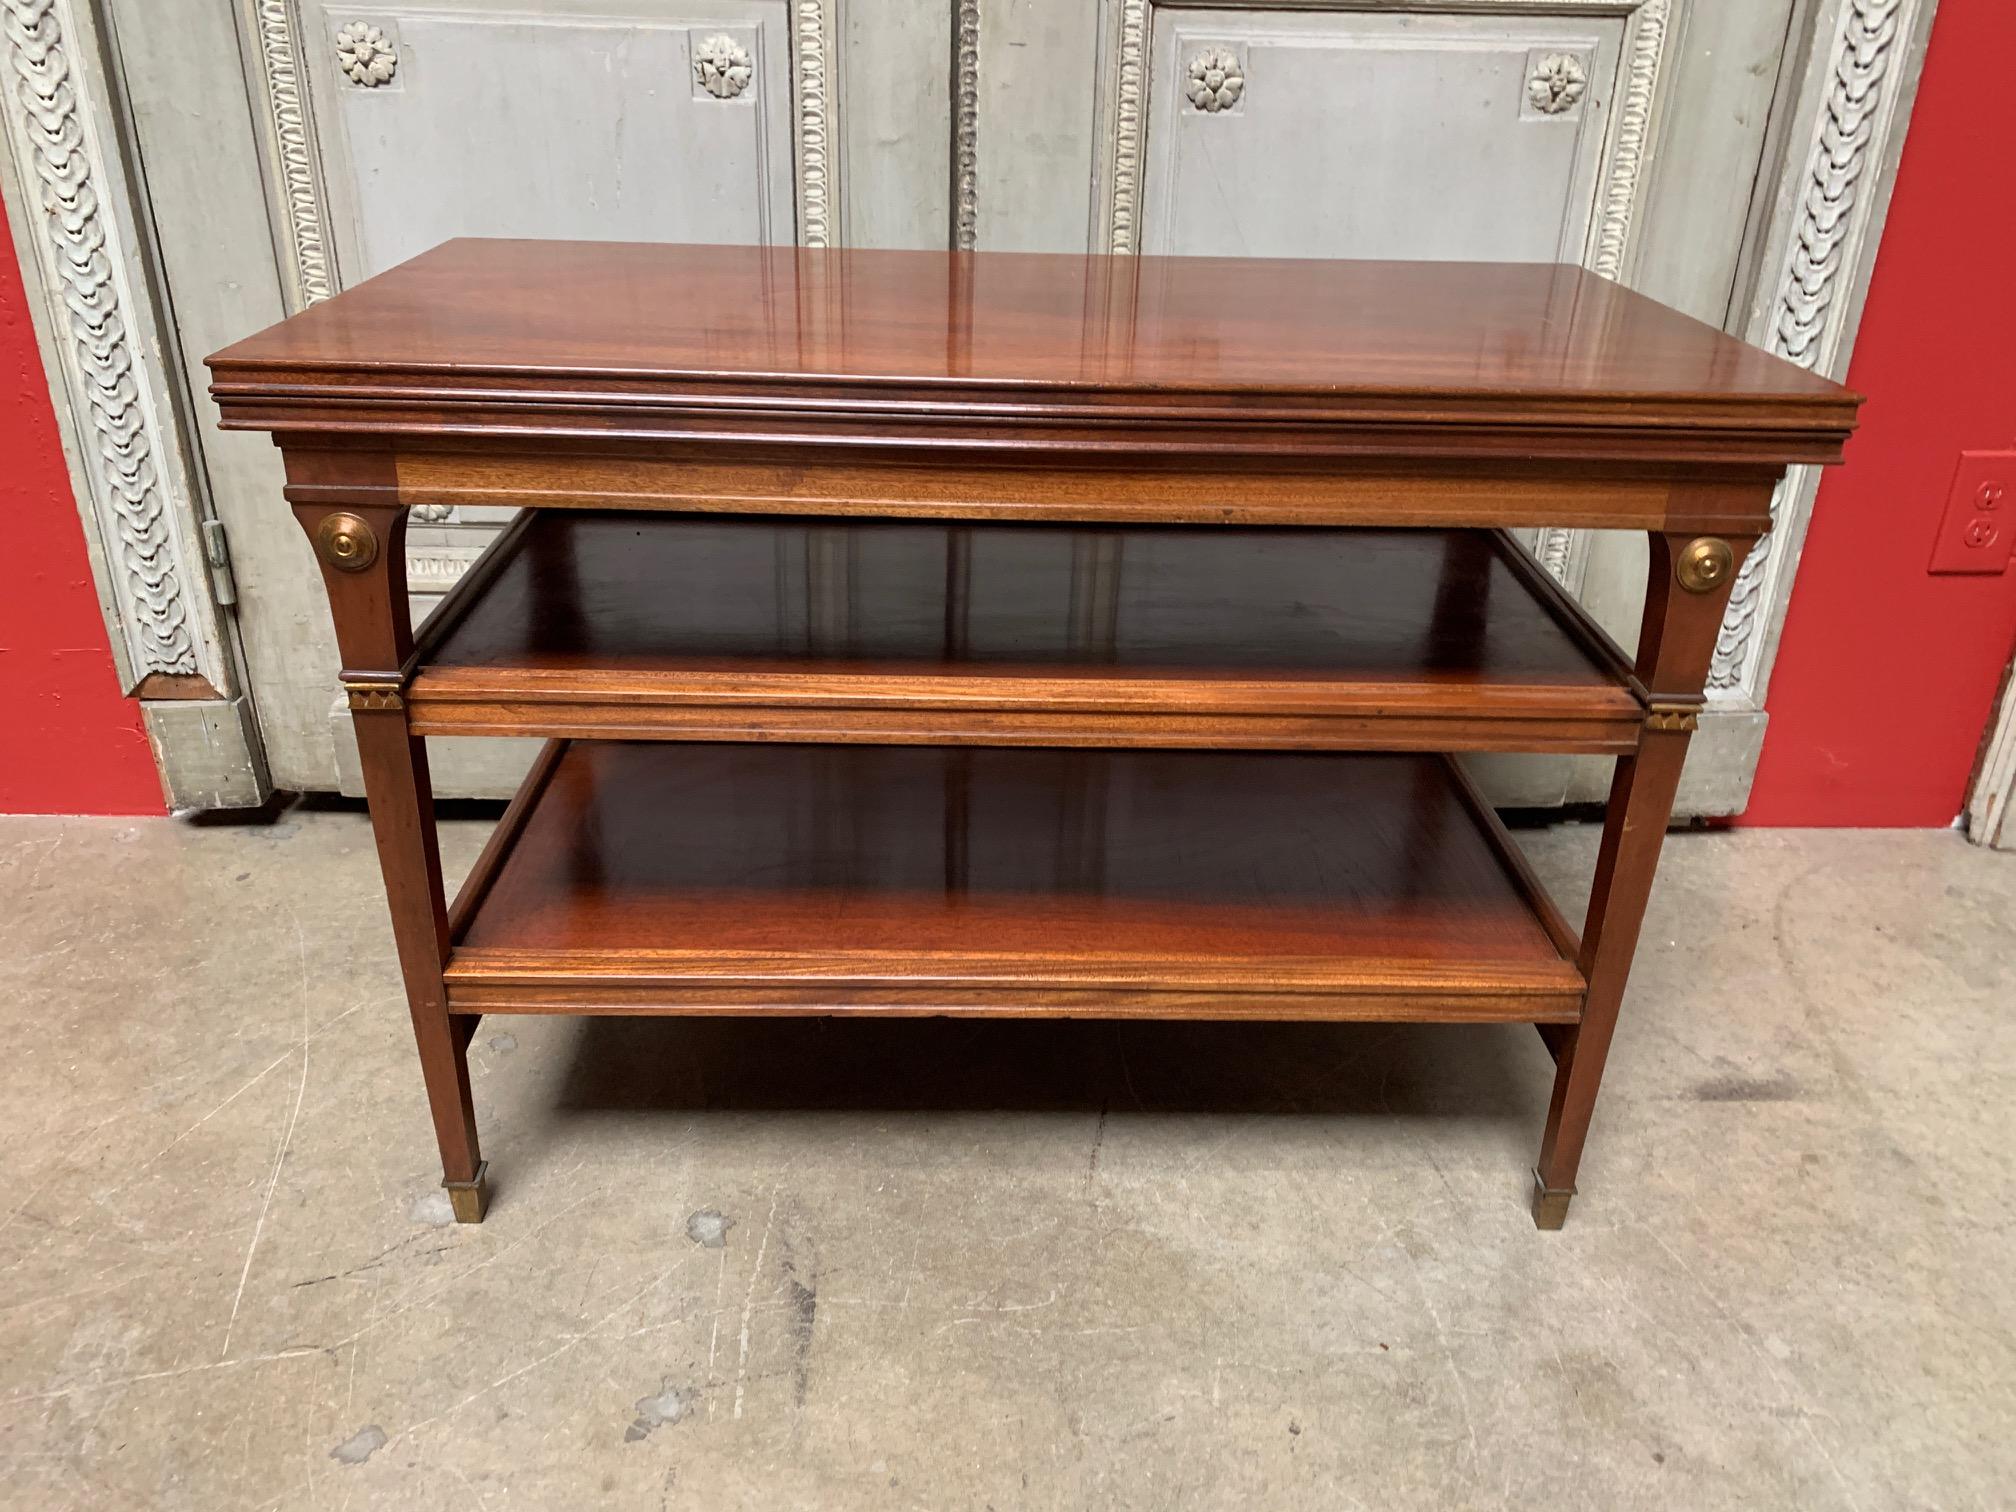 A neoclassical style flip top metamorphic tea table with a pullout tray attributed to Maison Jansen in mahogany with brass fittings.